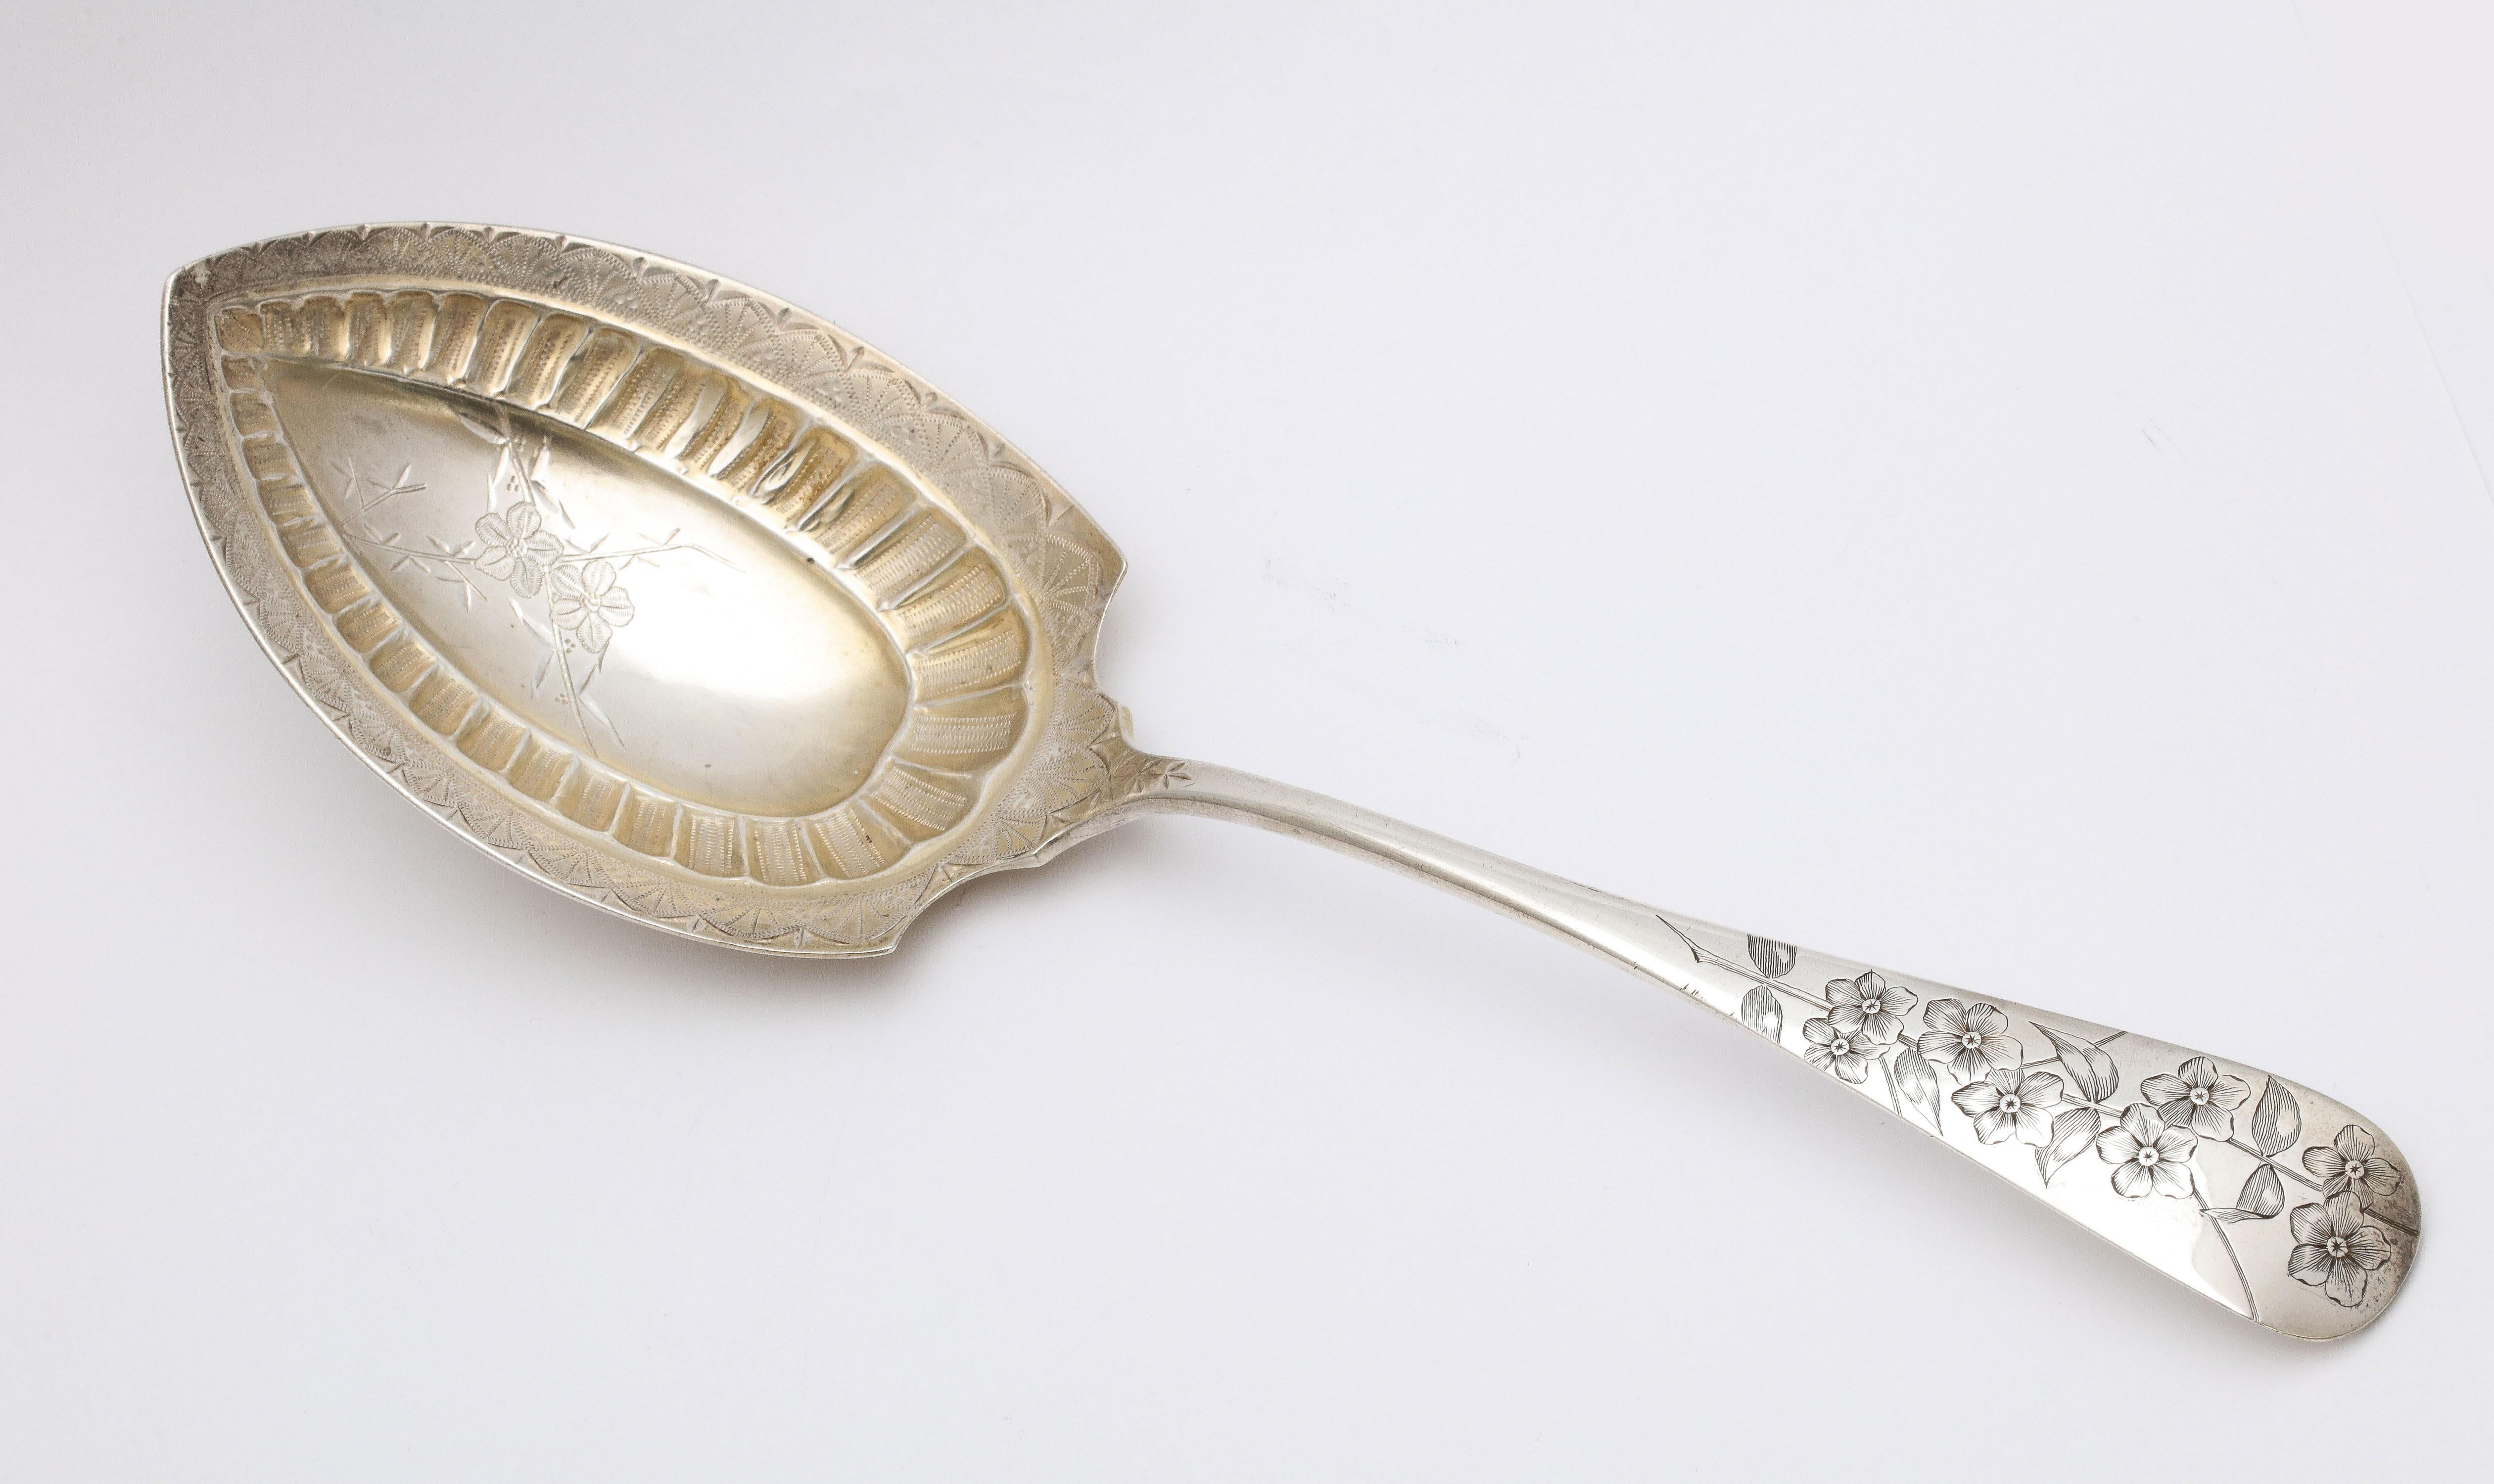 Large, beautiful, Aesthetic Movement, sterling silver, parcel gilt serving spoon (great for vegetables, cake/pie, desserts, potatoes, etc.), J.E. Caldwell, Philadelphia, Ca. 1880's. Bowl of spoon is gilded and has a lovely bright -cut design so that